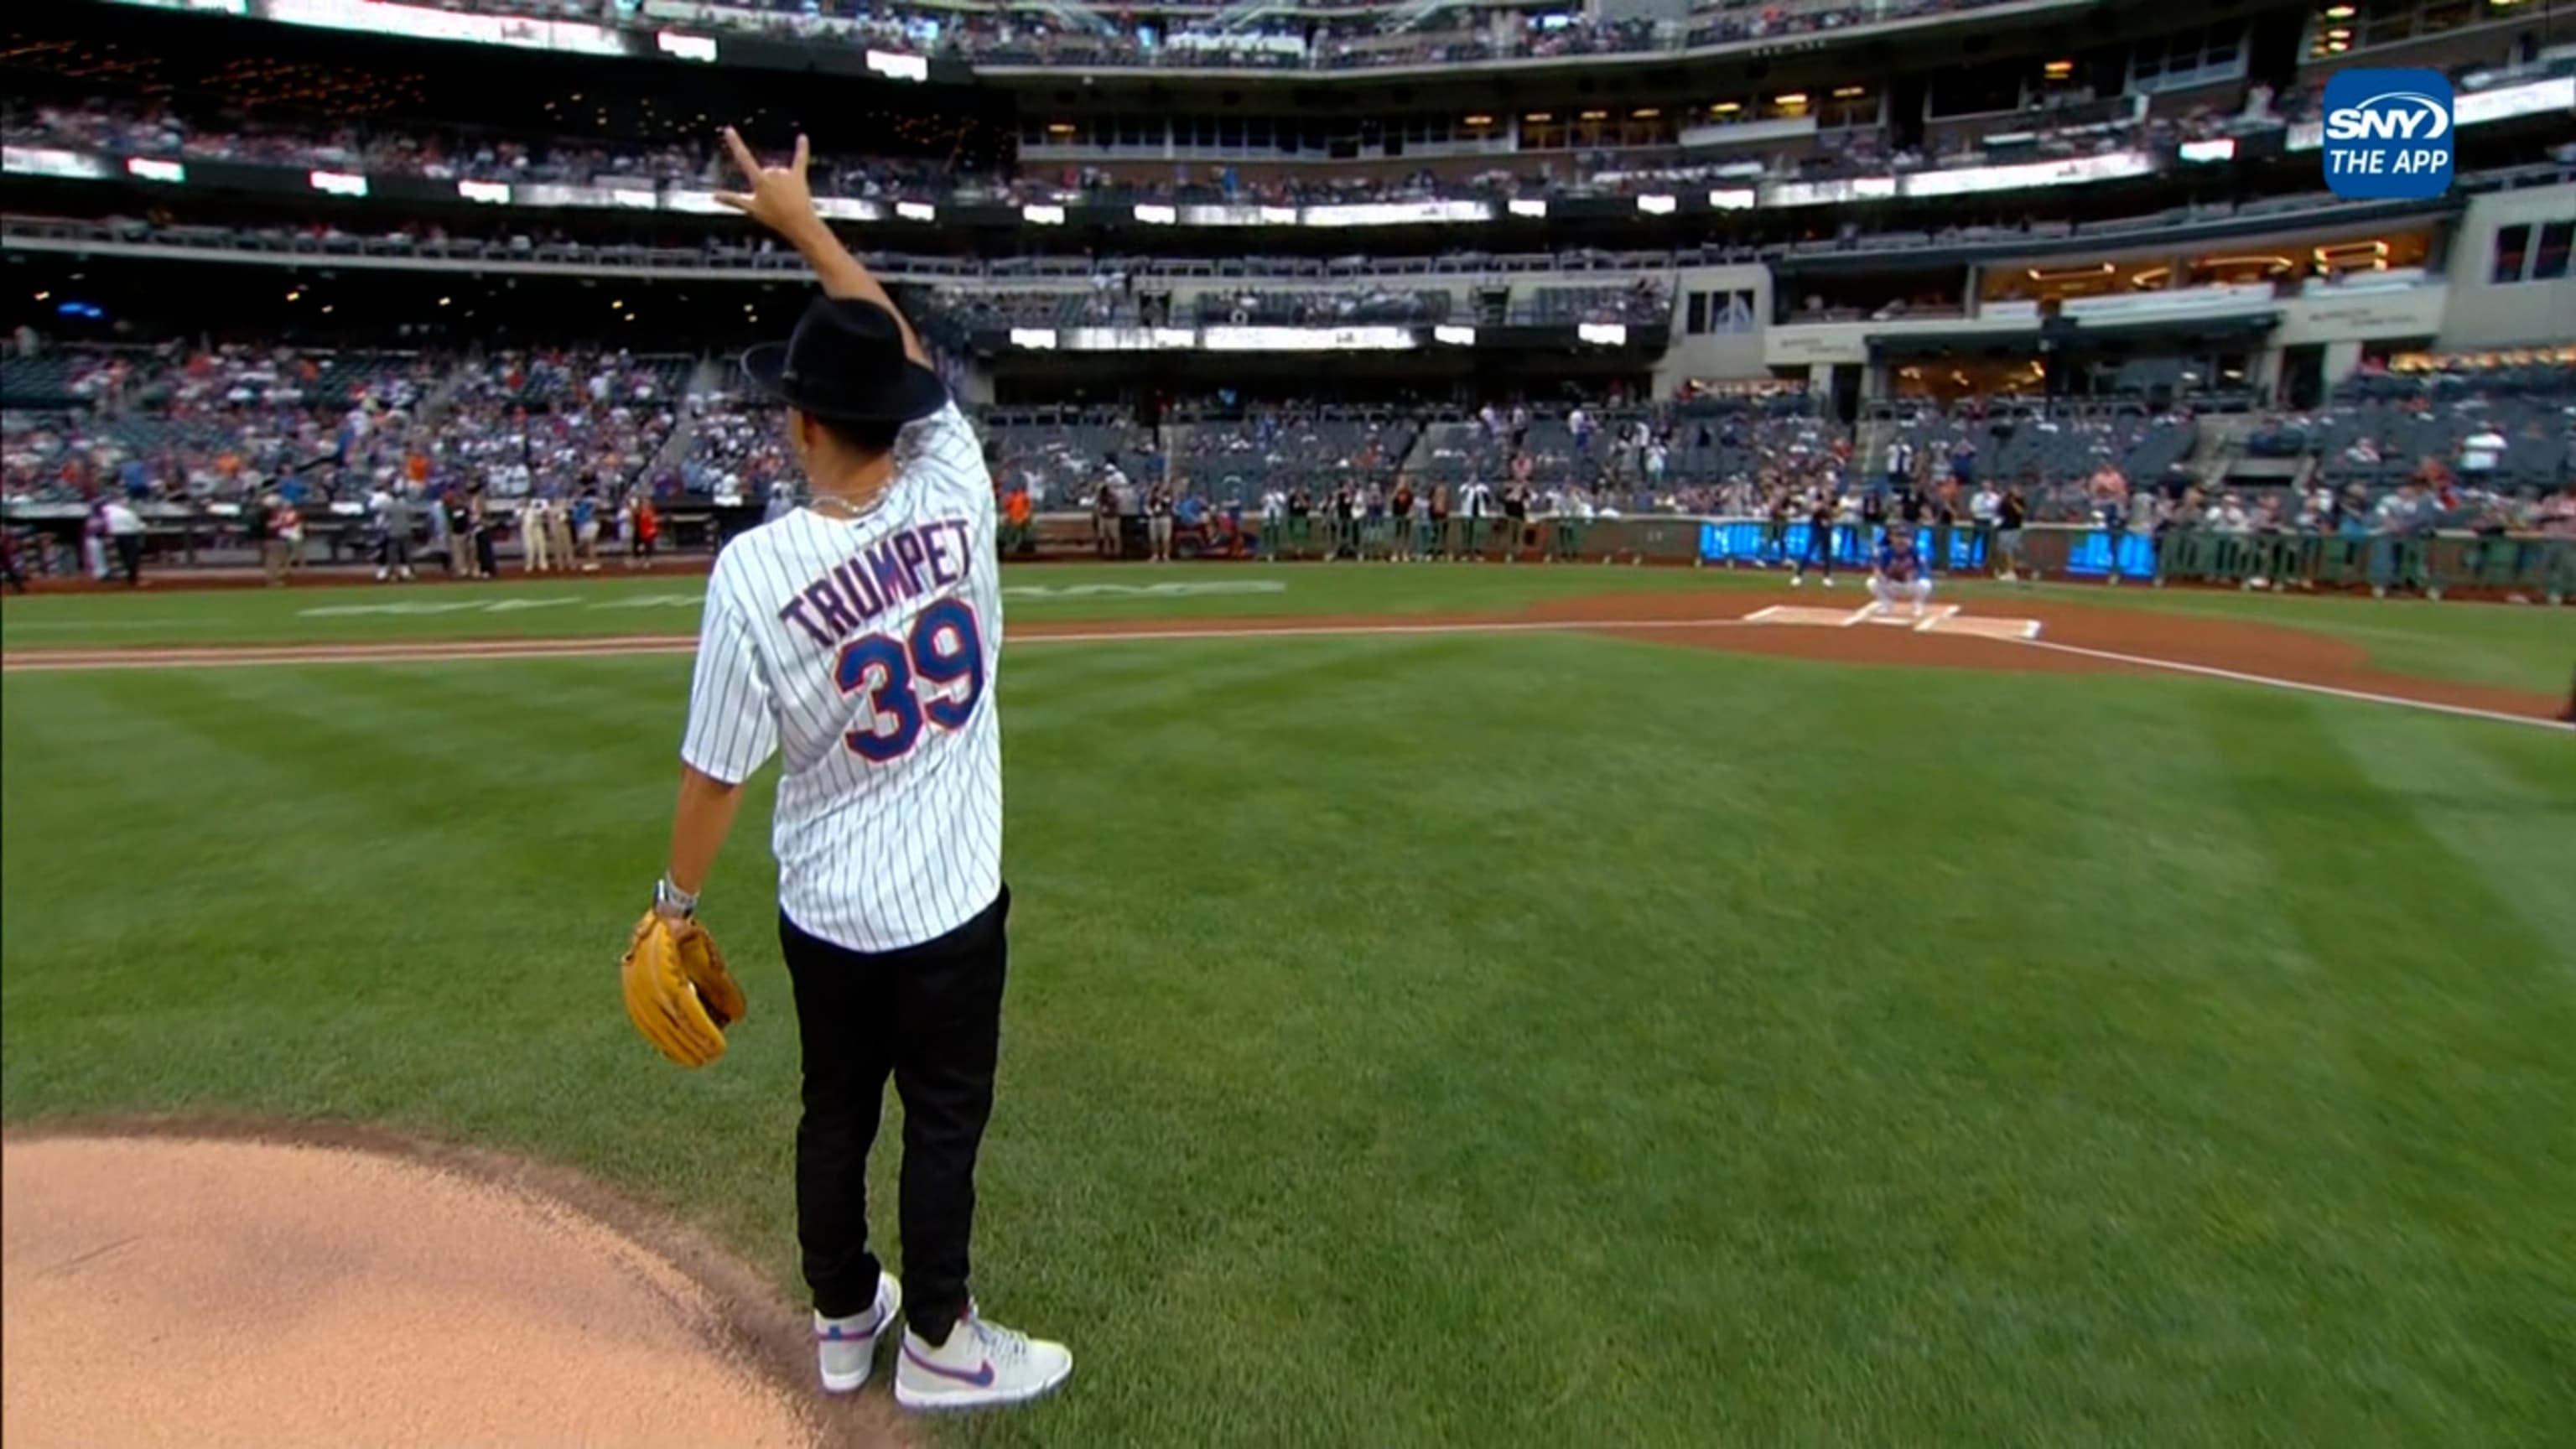 Timmy Trumpet Plays at Citi Field, Take Me Out to the Ballgame, Timmy  Trumpet style. 🎺, By New York Mets